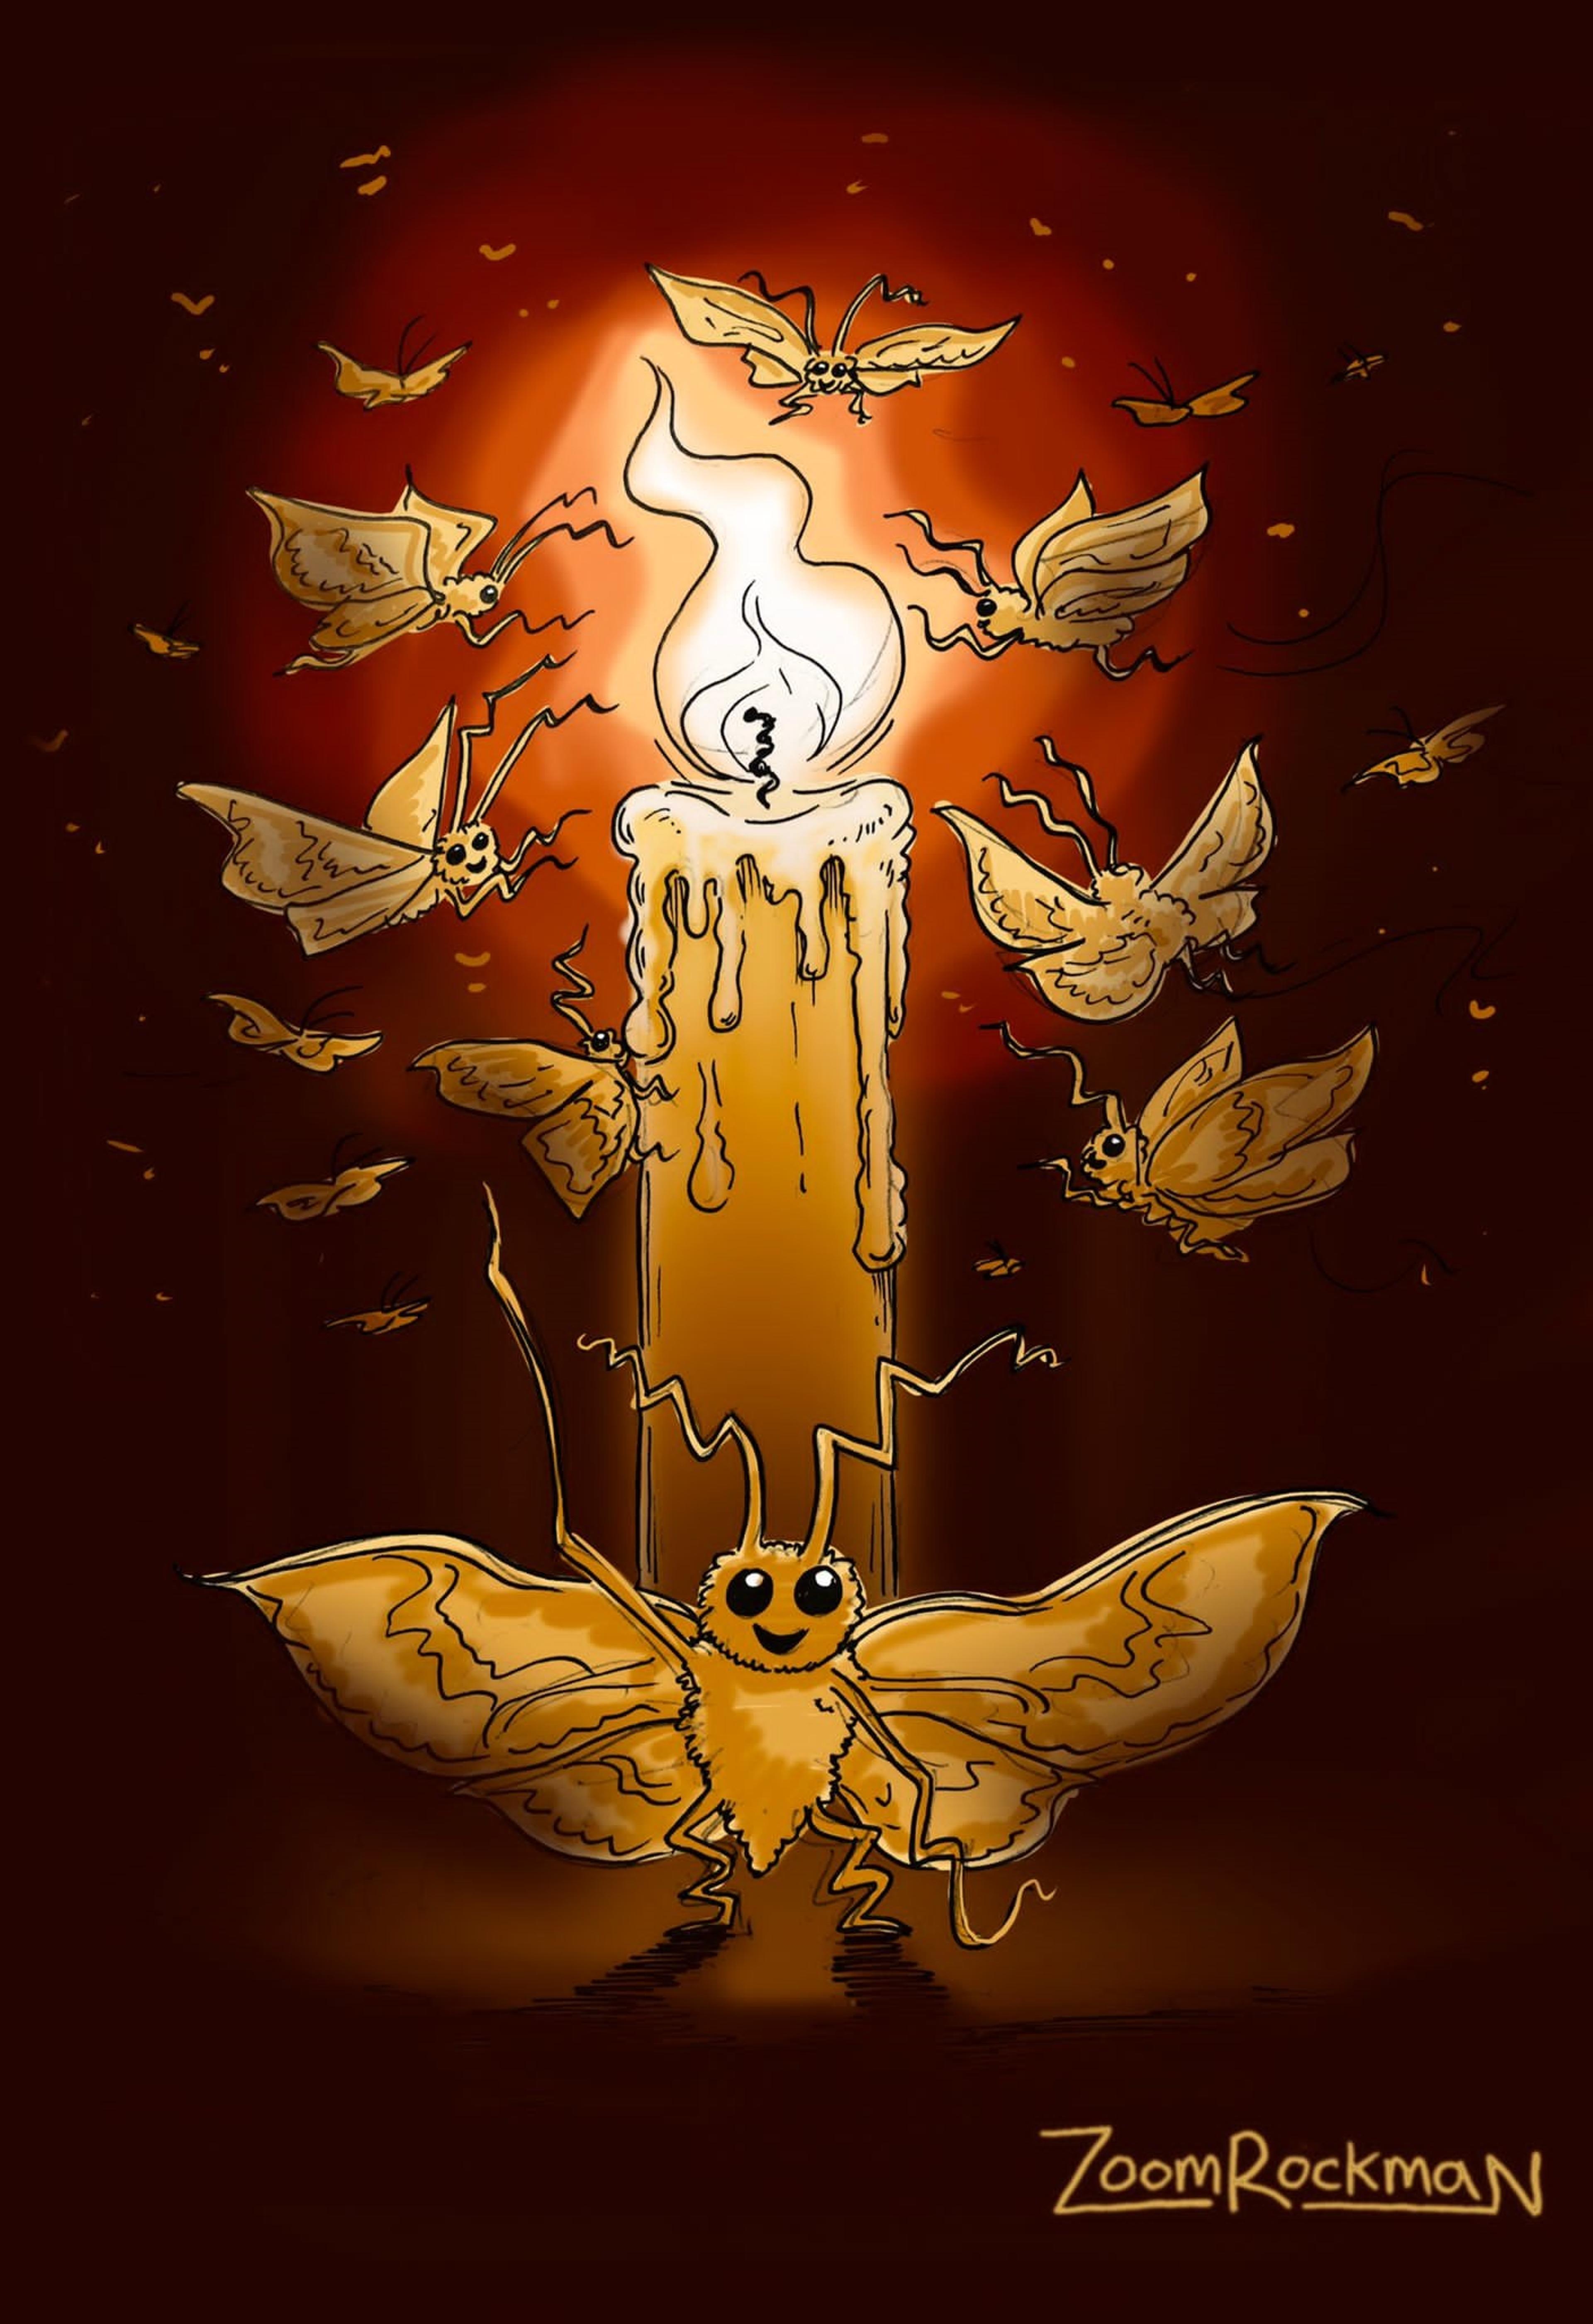 Illustration of an illuminated candle surrounded by moths